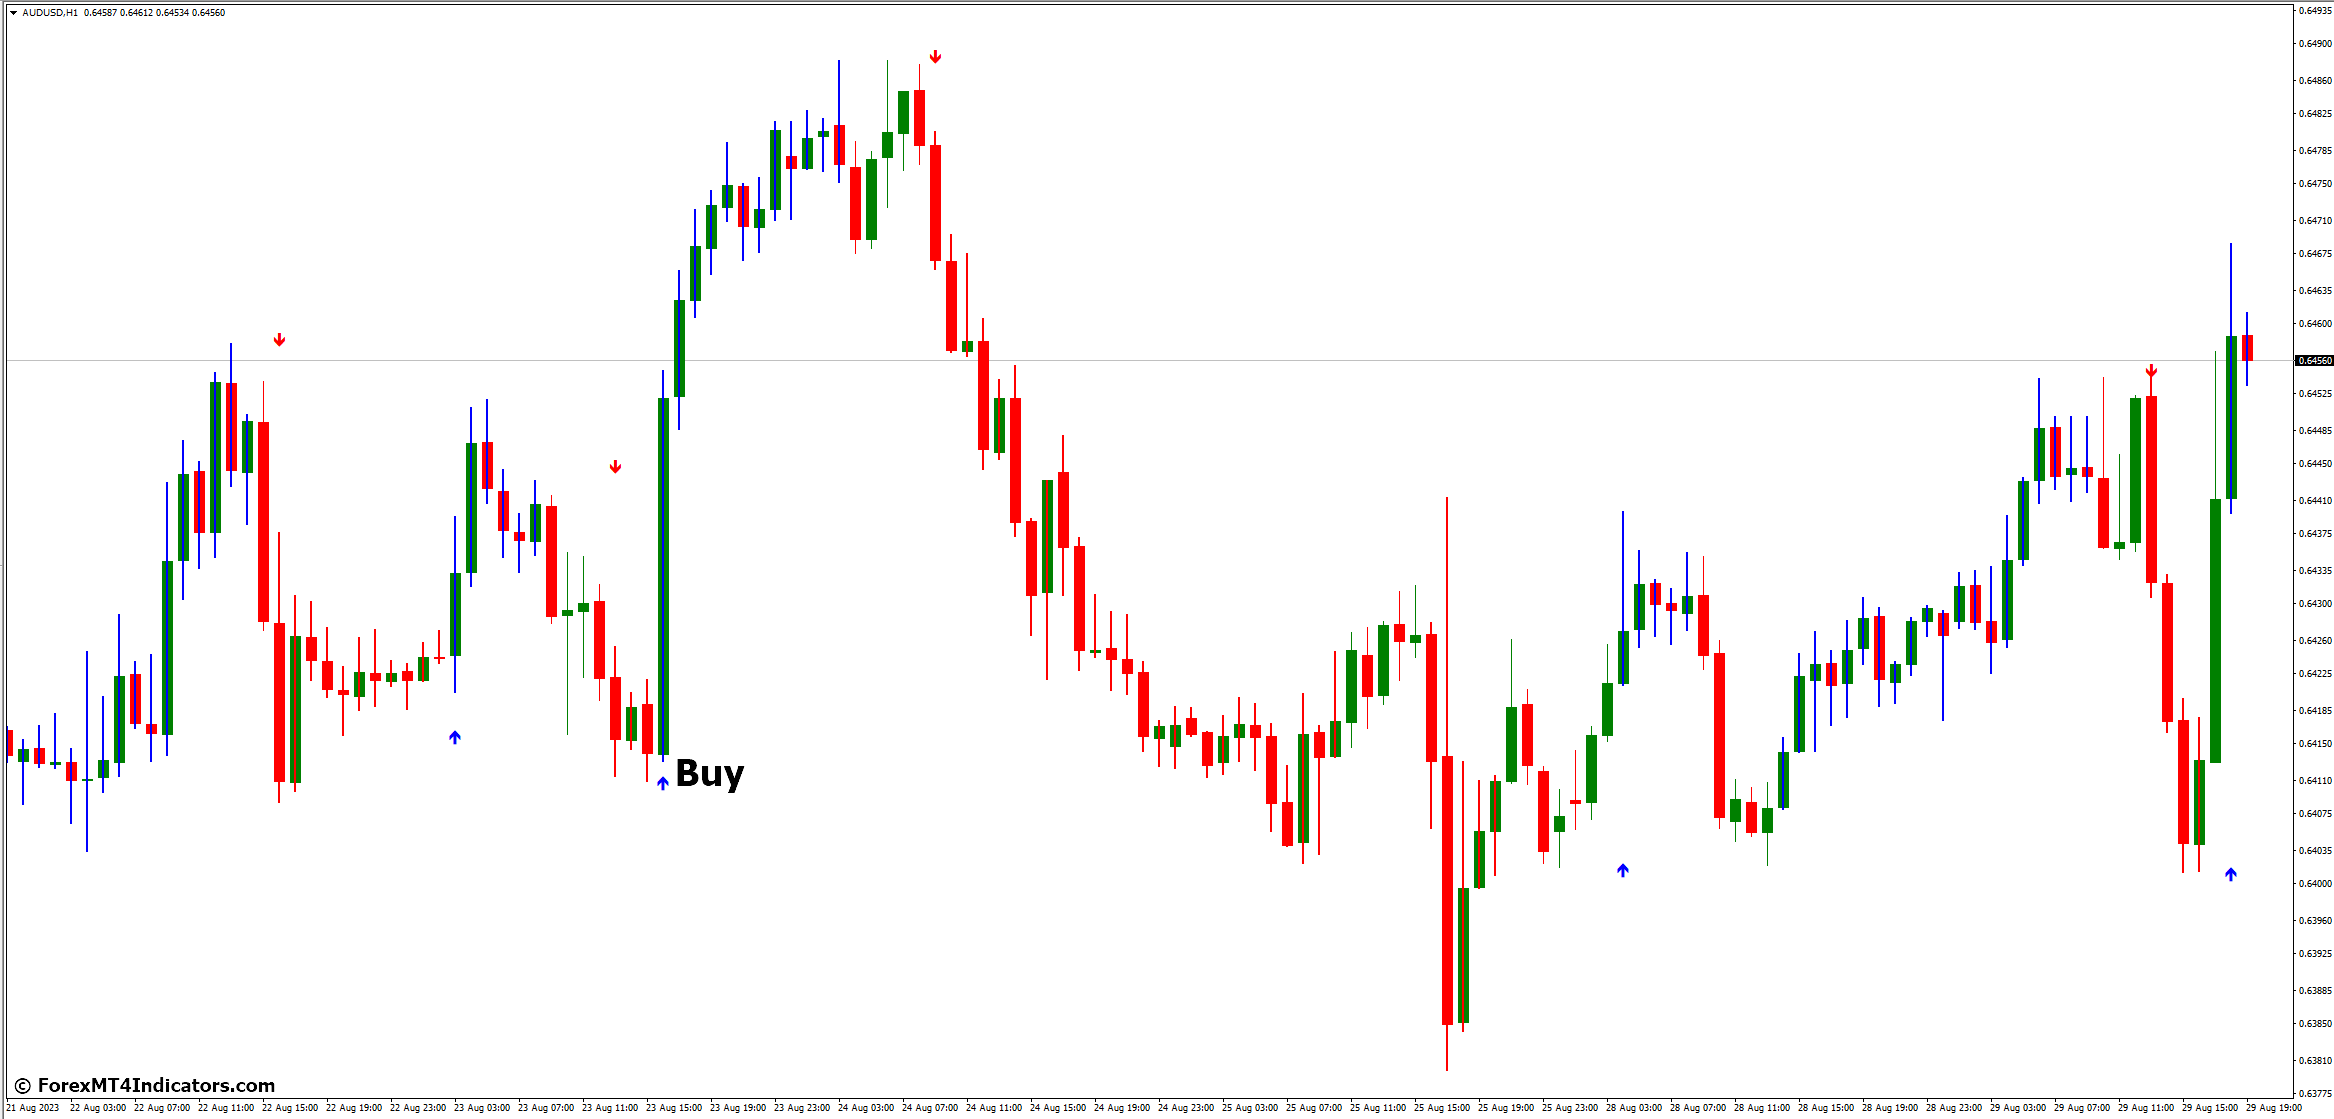 How to Trade with Entry Signal MT4 Indicator - Buy Entry